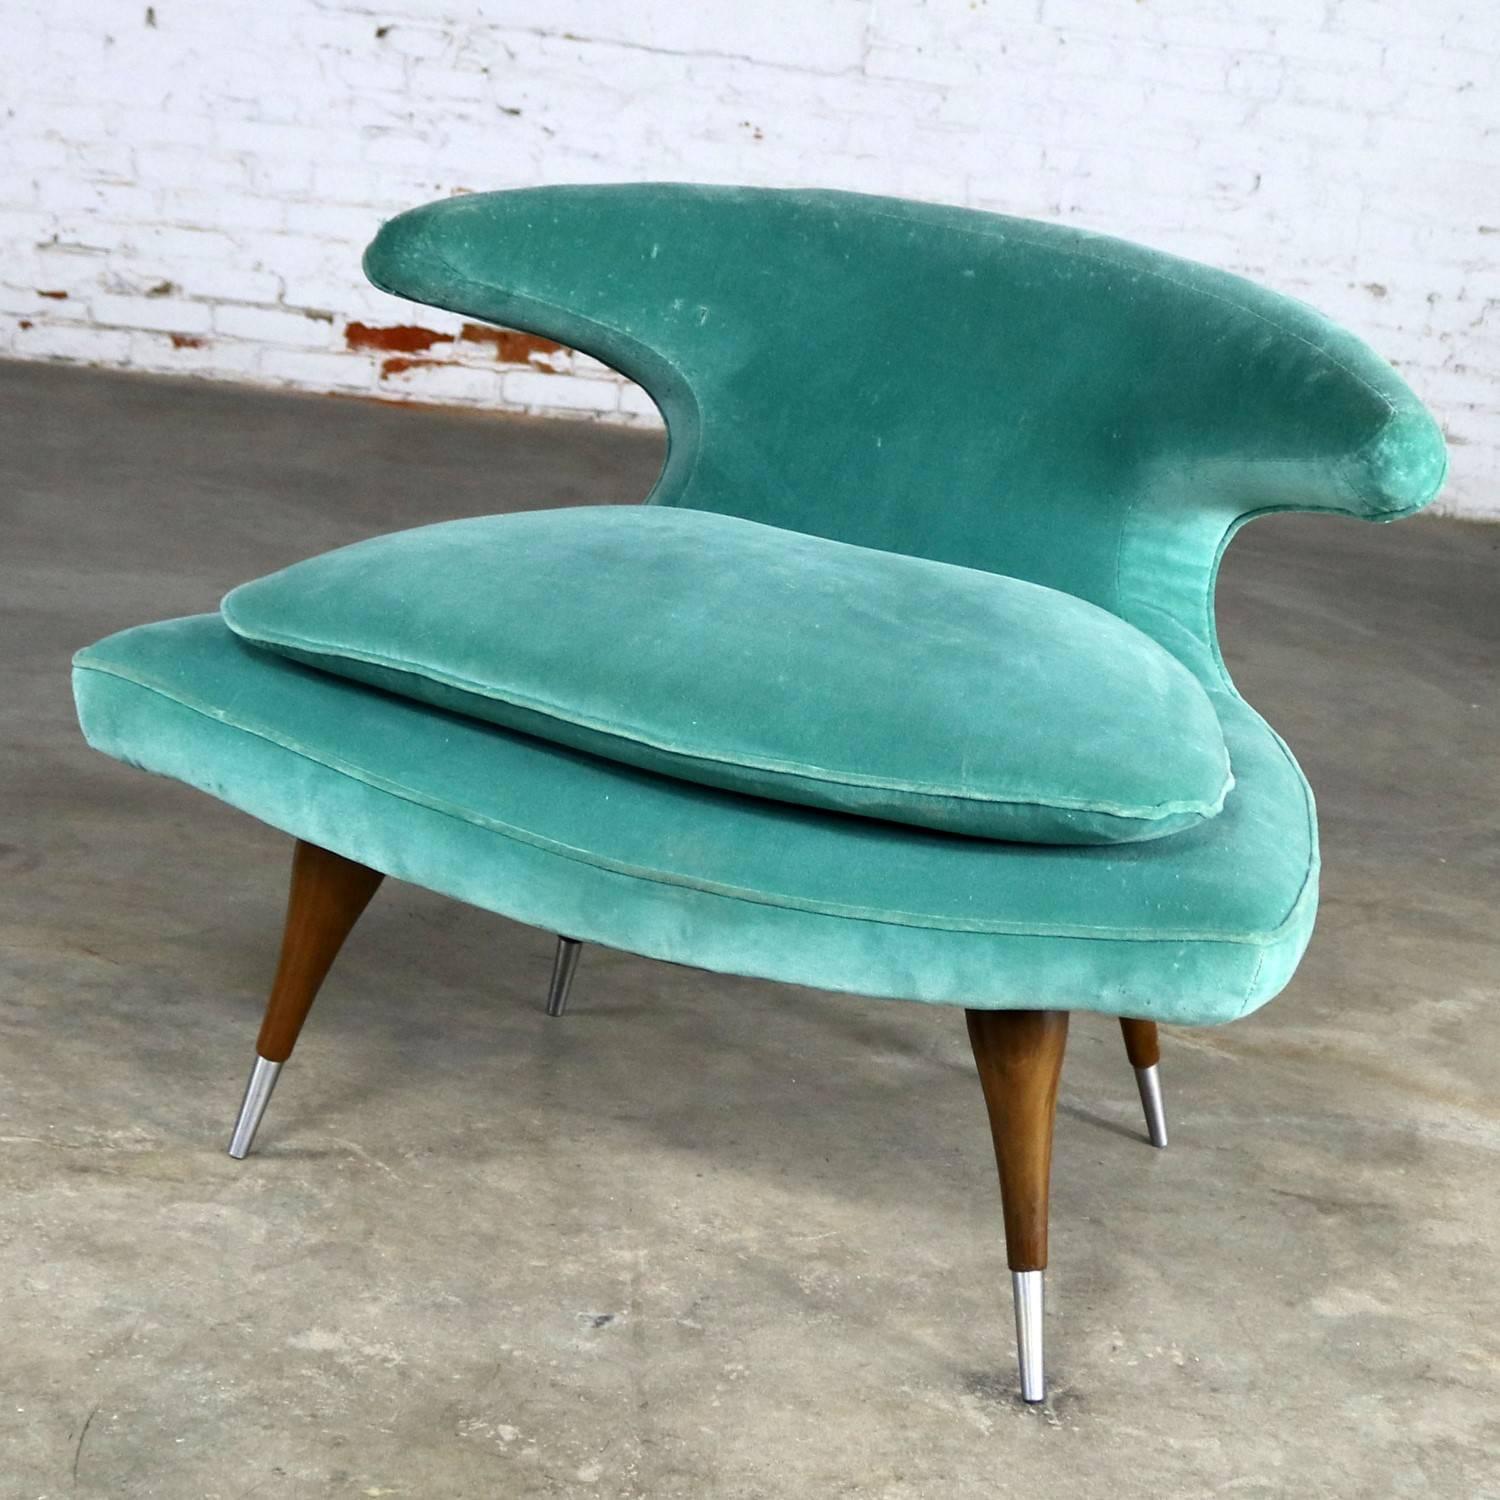 Awesome MCM horn chair by Karpen of California in turquoise velvet upholstery and walnut legs with silver-tone metal sabots. This chair is in wonderful condition structurally, the foam is soft, and the legs are excellent; however, the original